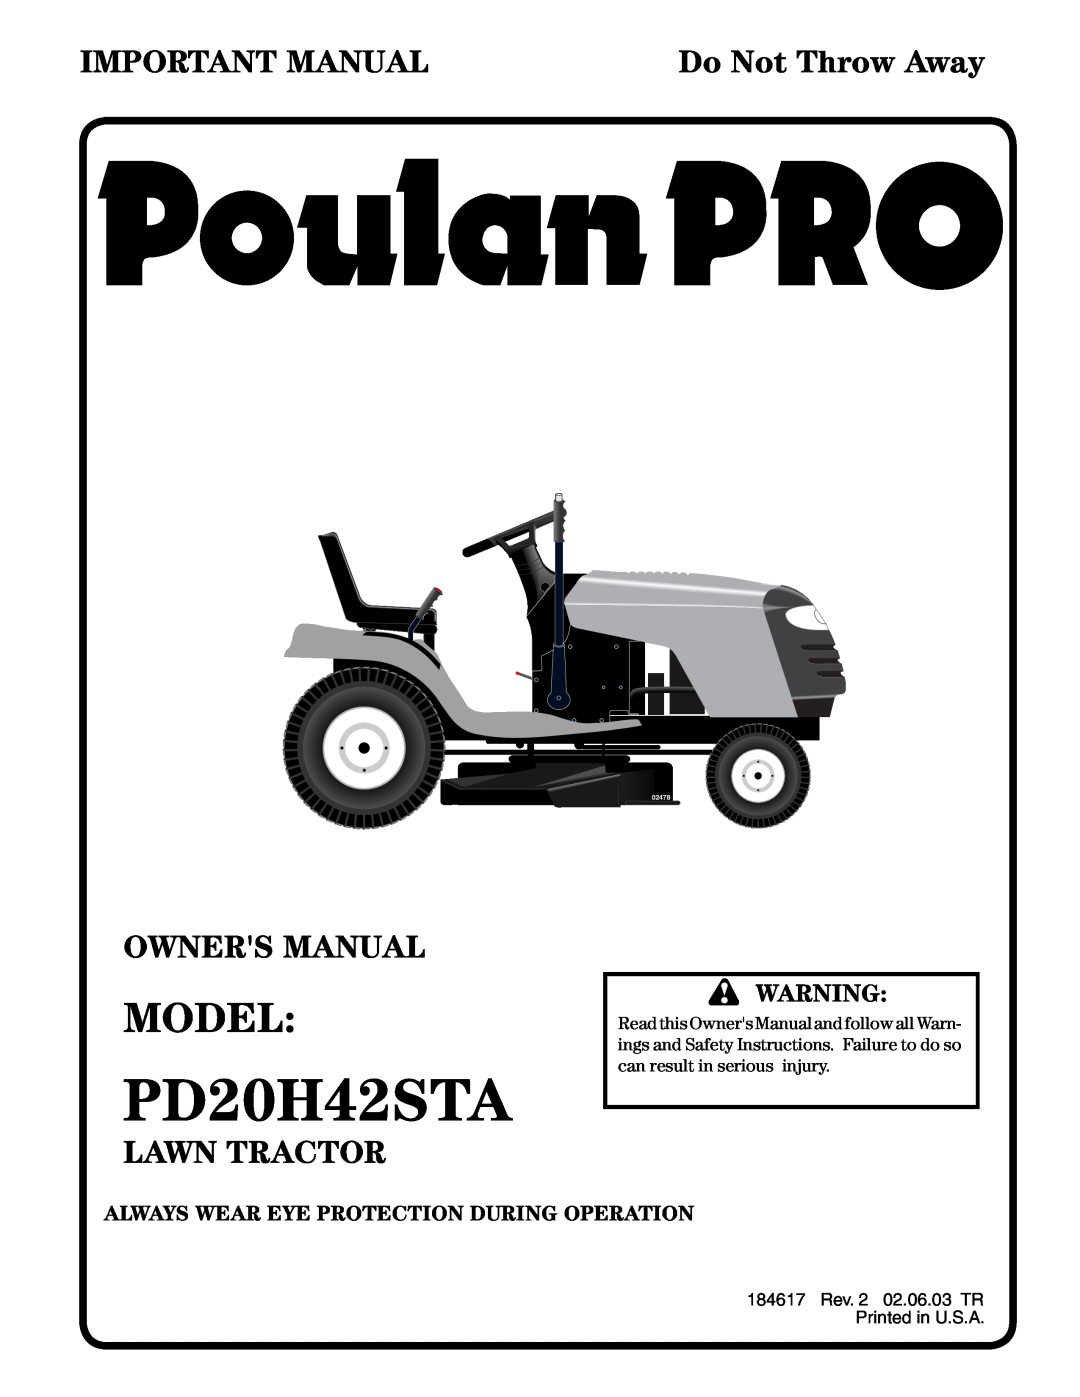 Poulan 184617 owner manual Model, PD20H42STA, Important Manual, Owners Manual, Lawn Tractor, Do Not Throw Away, 02478 